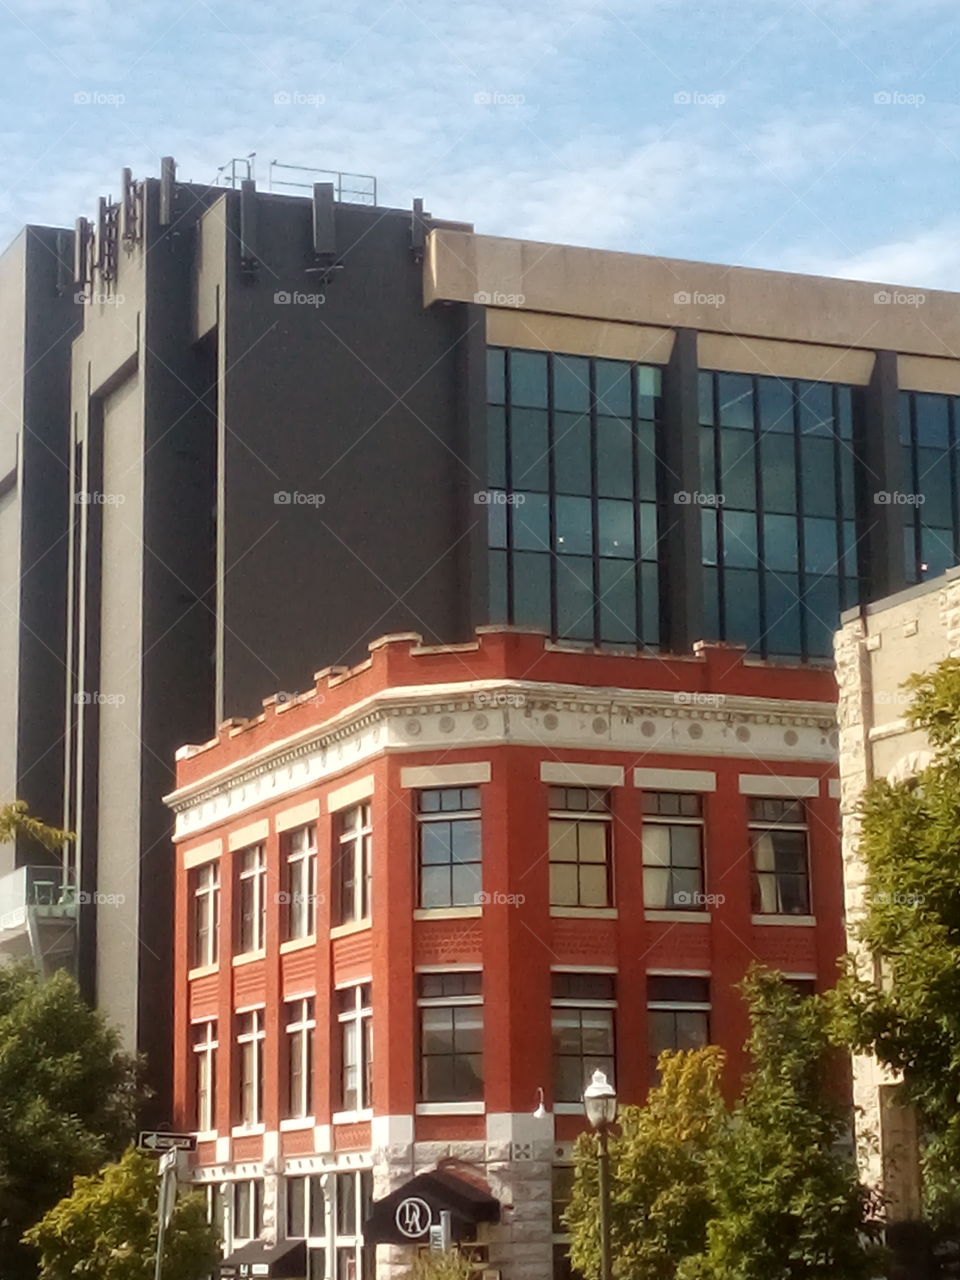 along side the new modern building is an old vintage red brick building.up on the square.